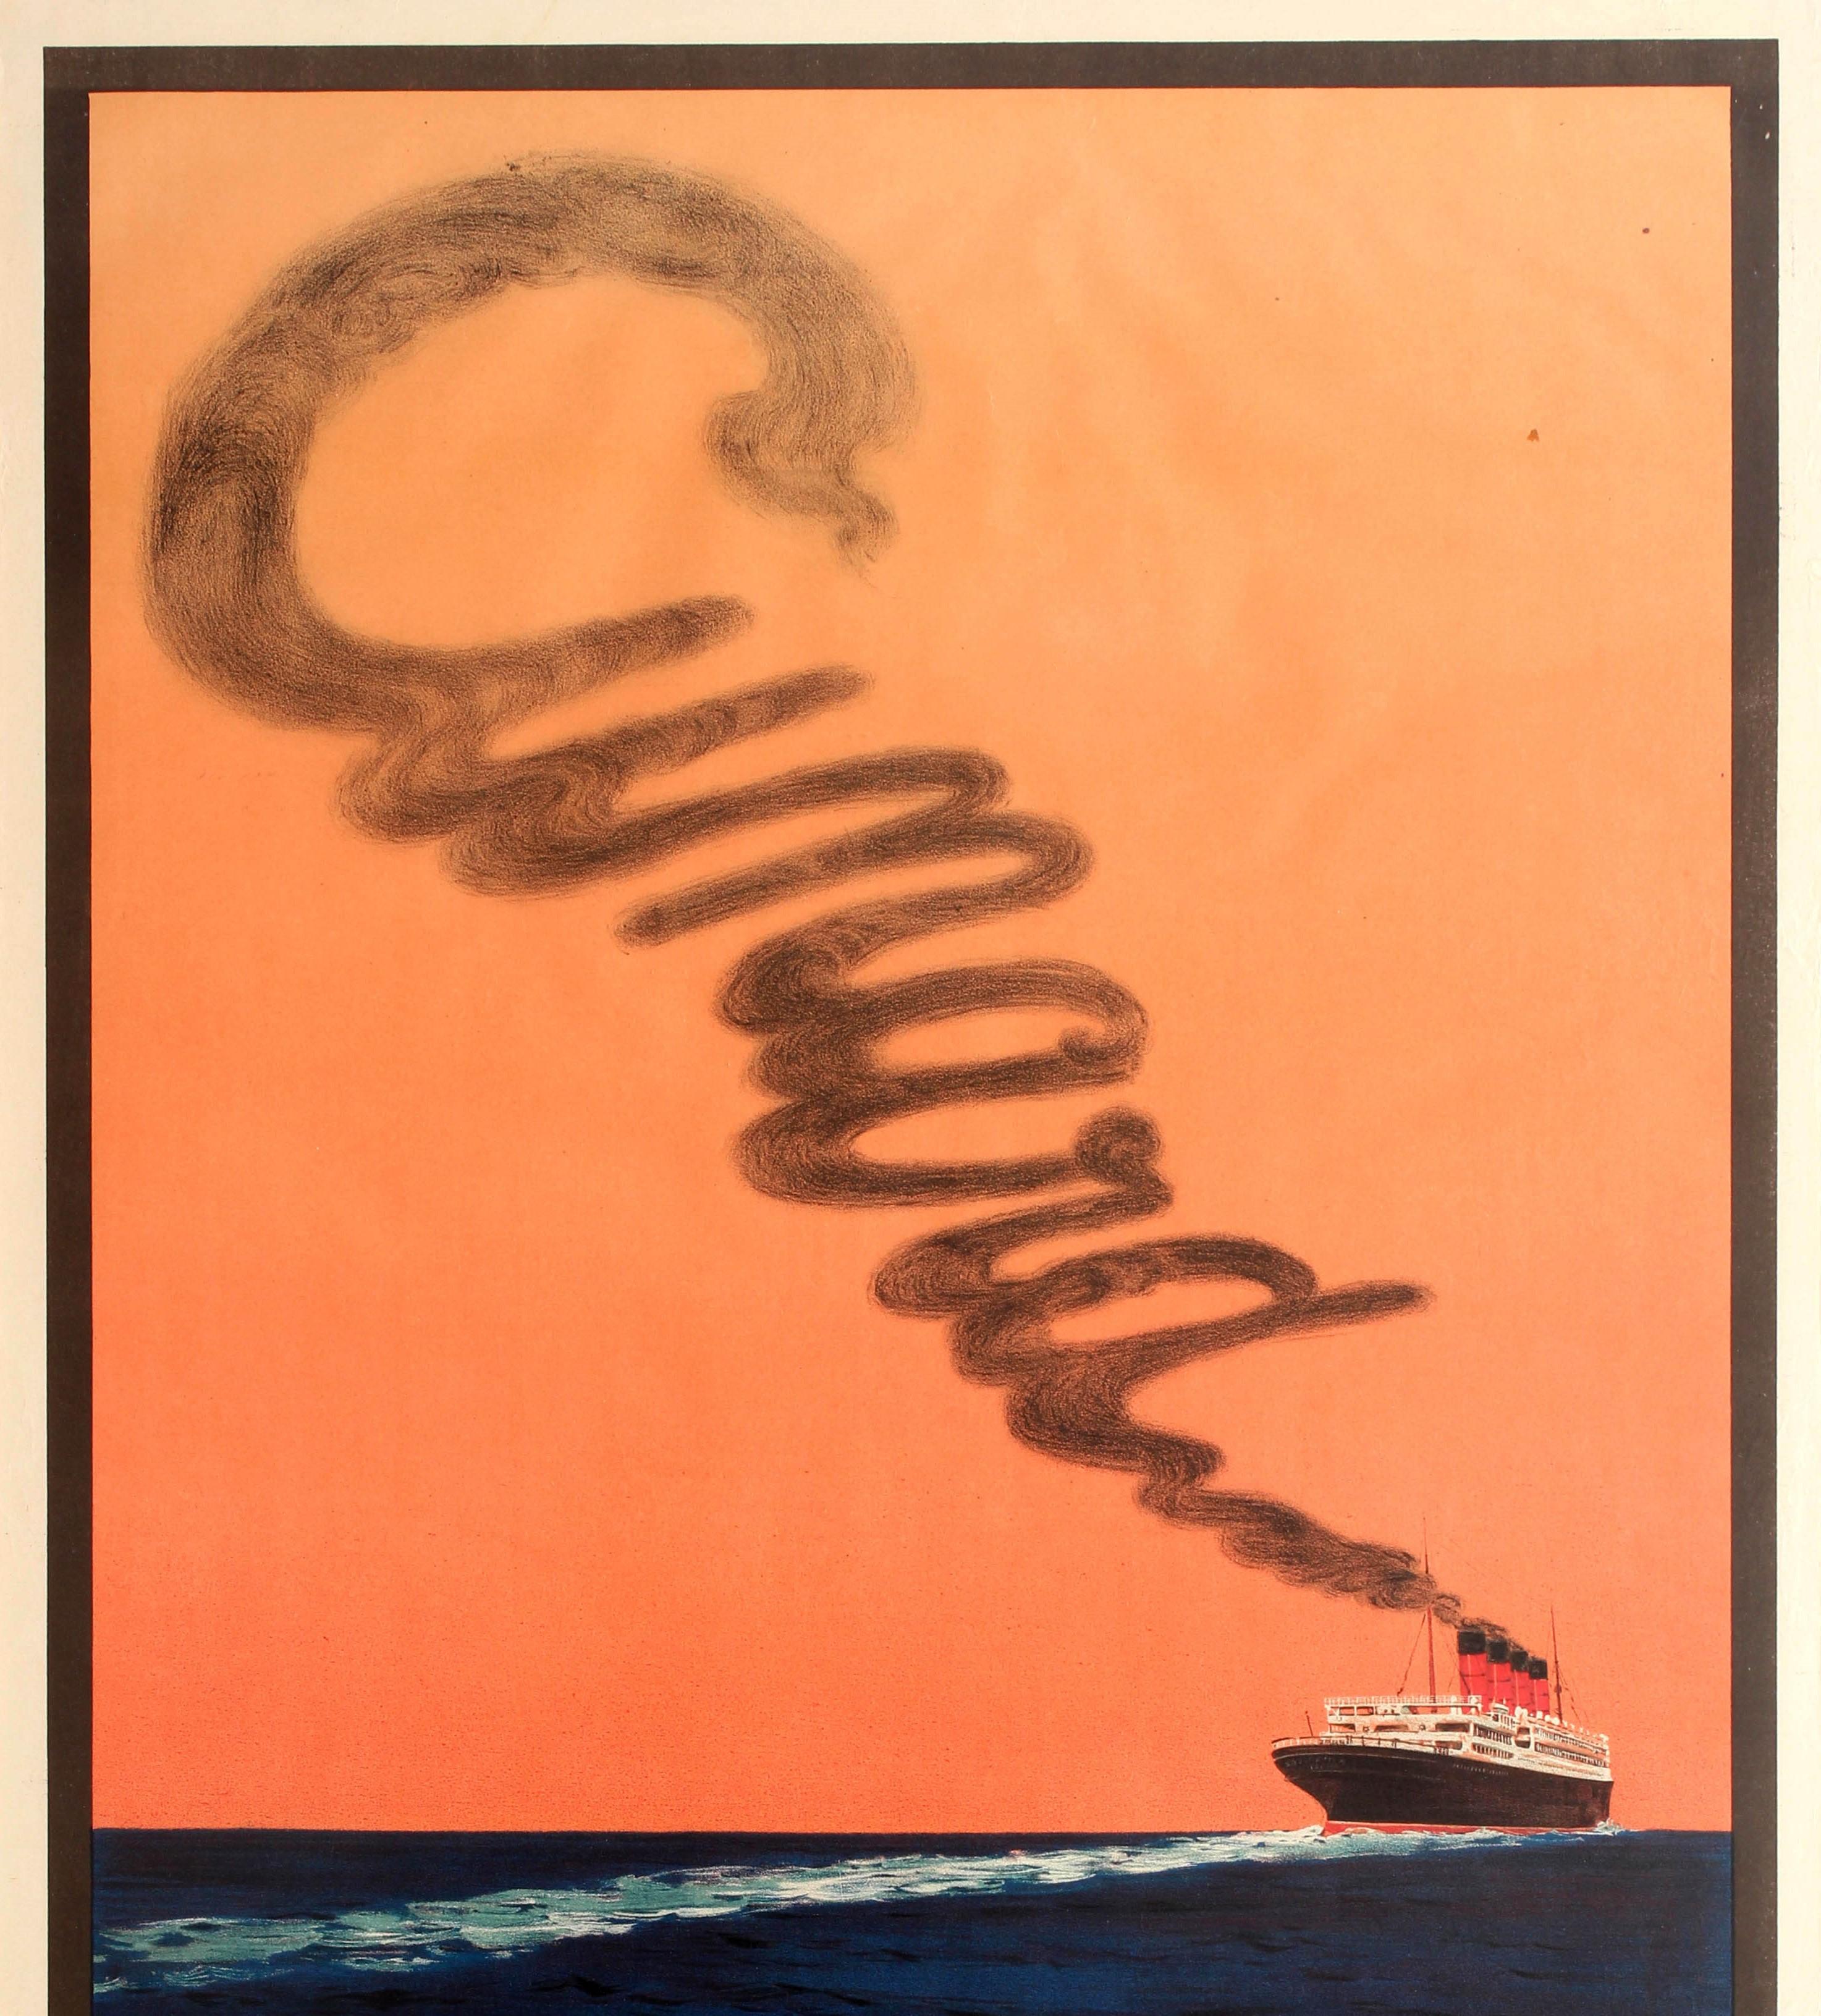 Original vintage transatlantic cruise travel poster for Cunard featuring a stunning image of their flagship ocean liner the Aquitania (1914-1950) sailing across the Atlantic Ocean with the smoke from the ship filling the sunset sky with the word